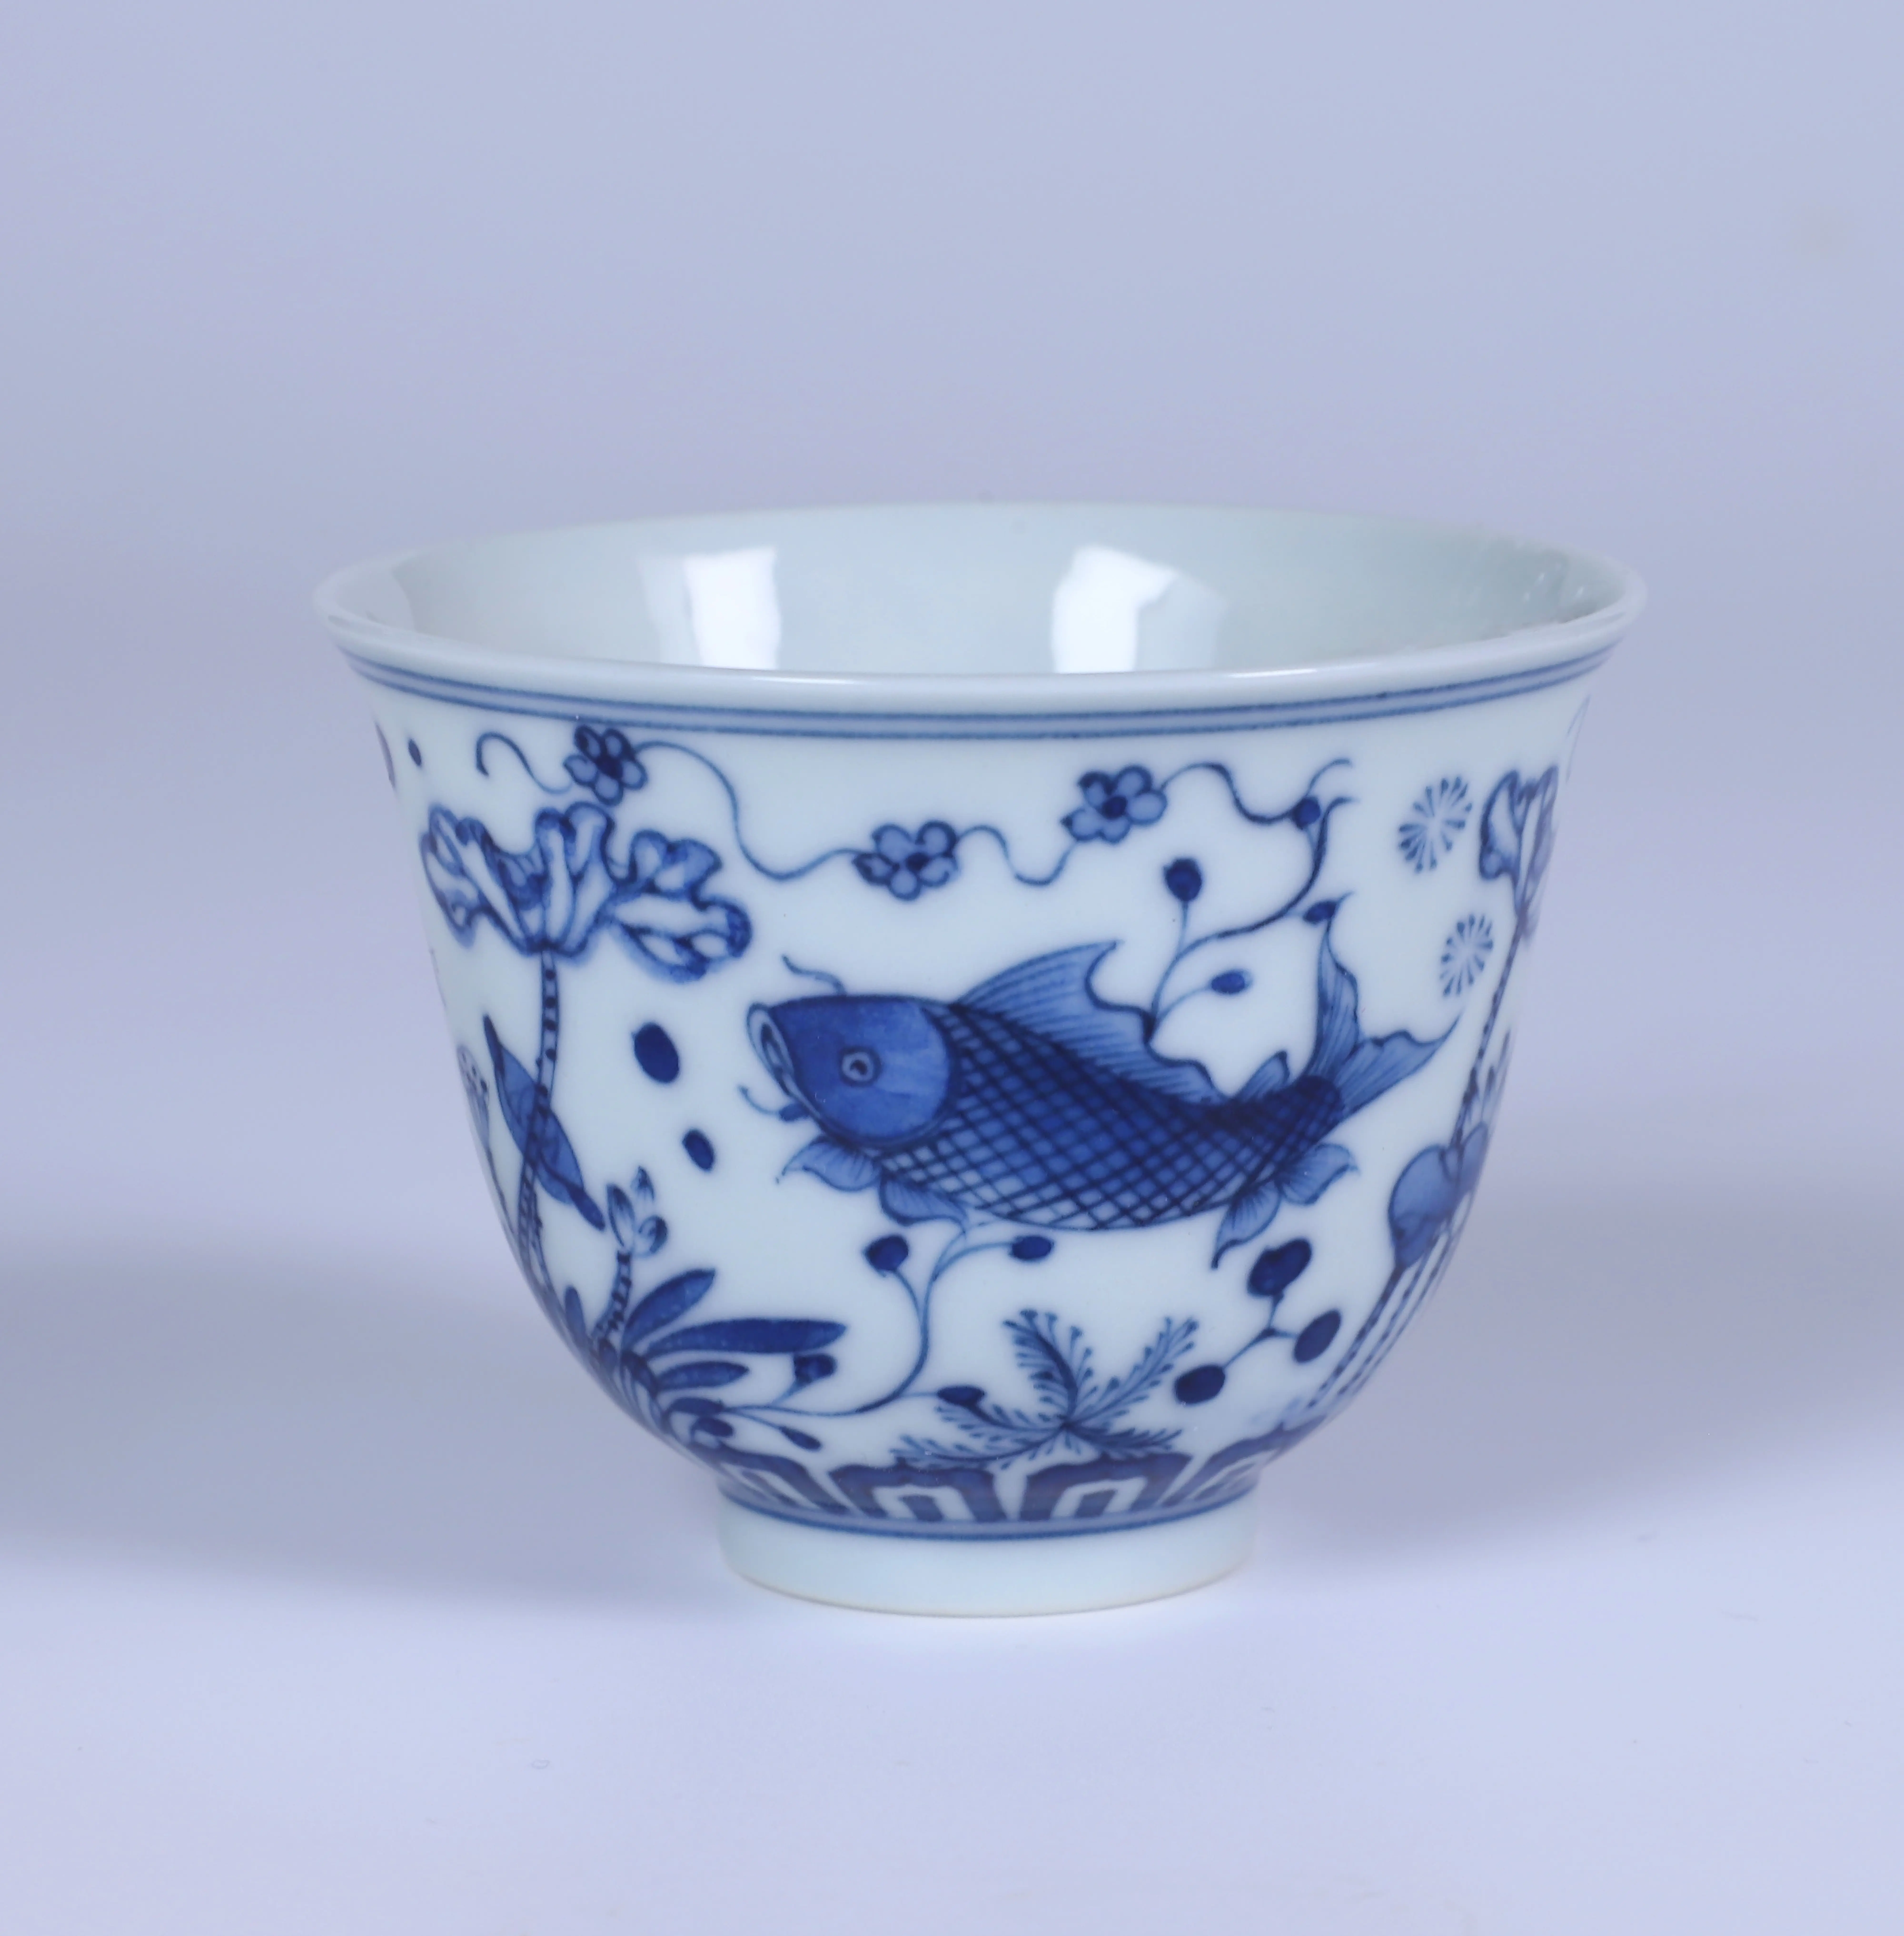 New Customized Jingdezhen Tea Cup Chinese Blue and White Porcelain Tea Cup Set for Drinking